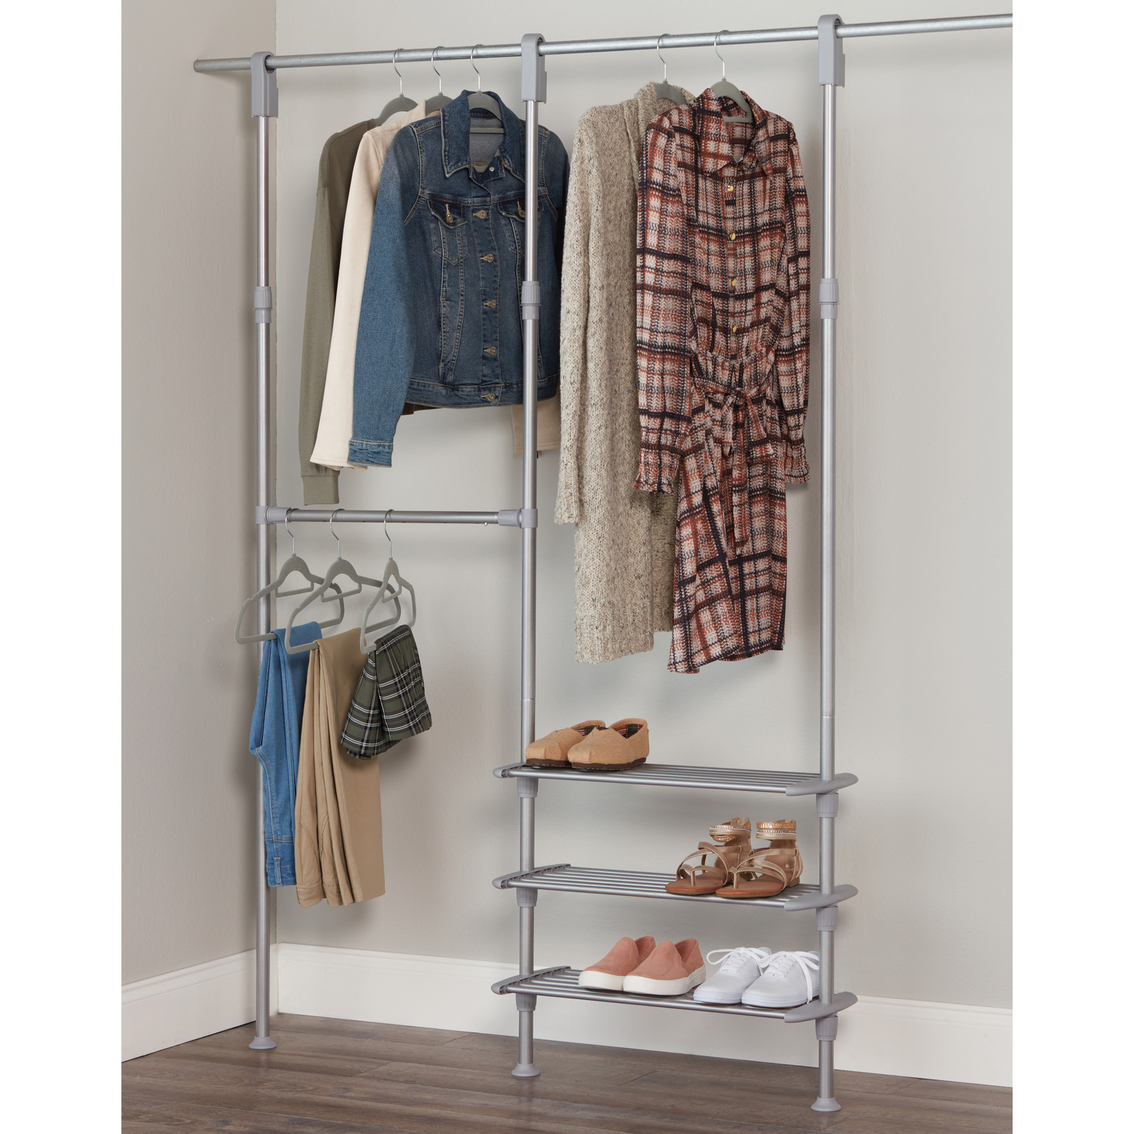 Simply Perfect 2 Rod Adjustable Closet System - Image 3 of 3